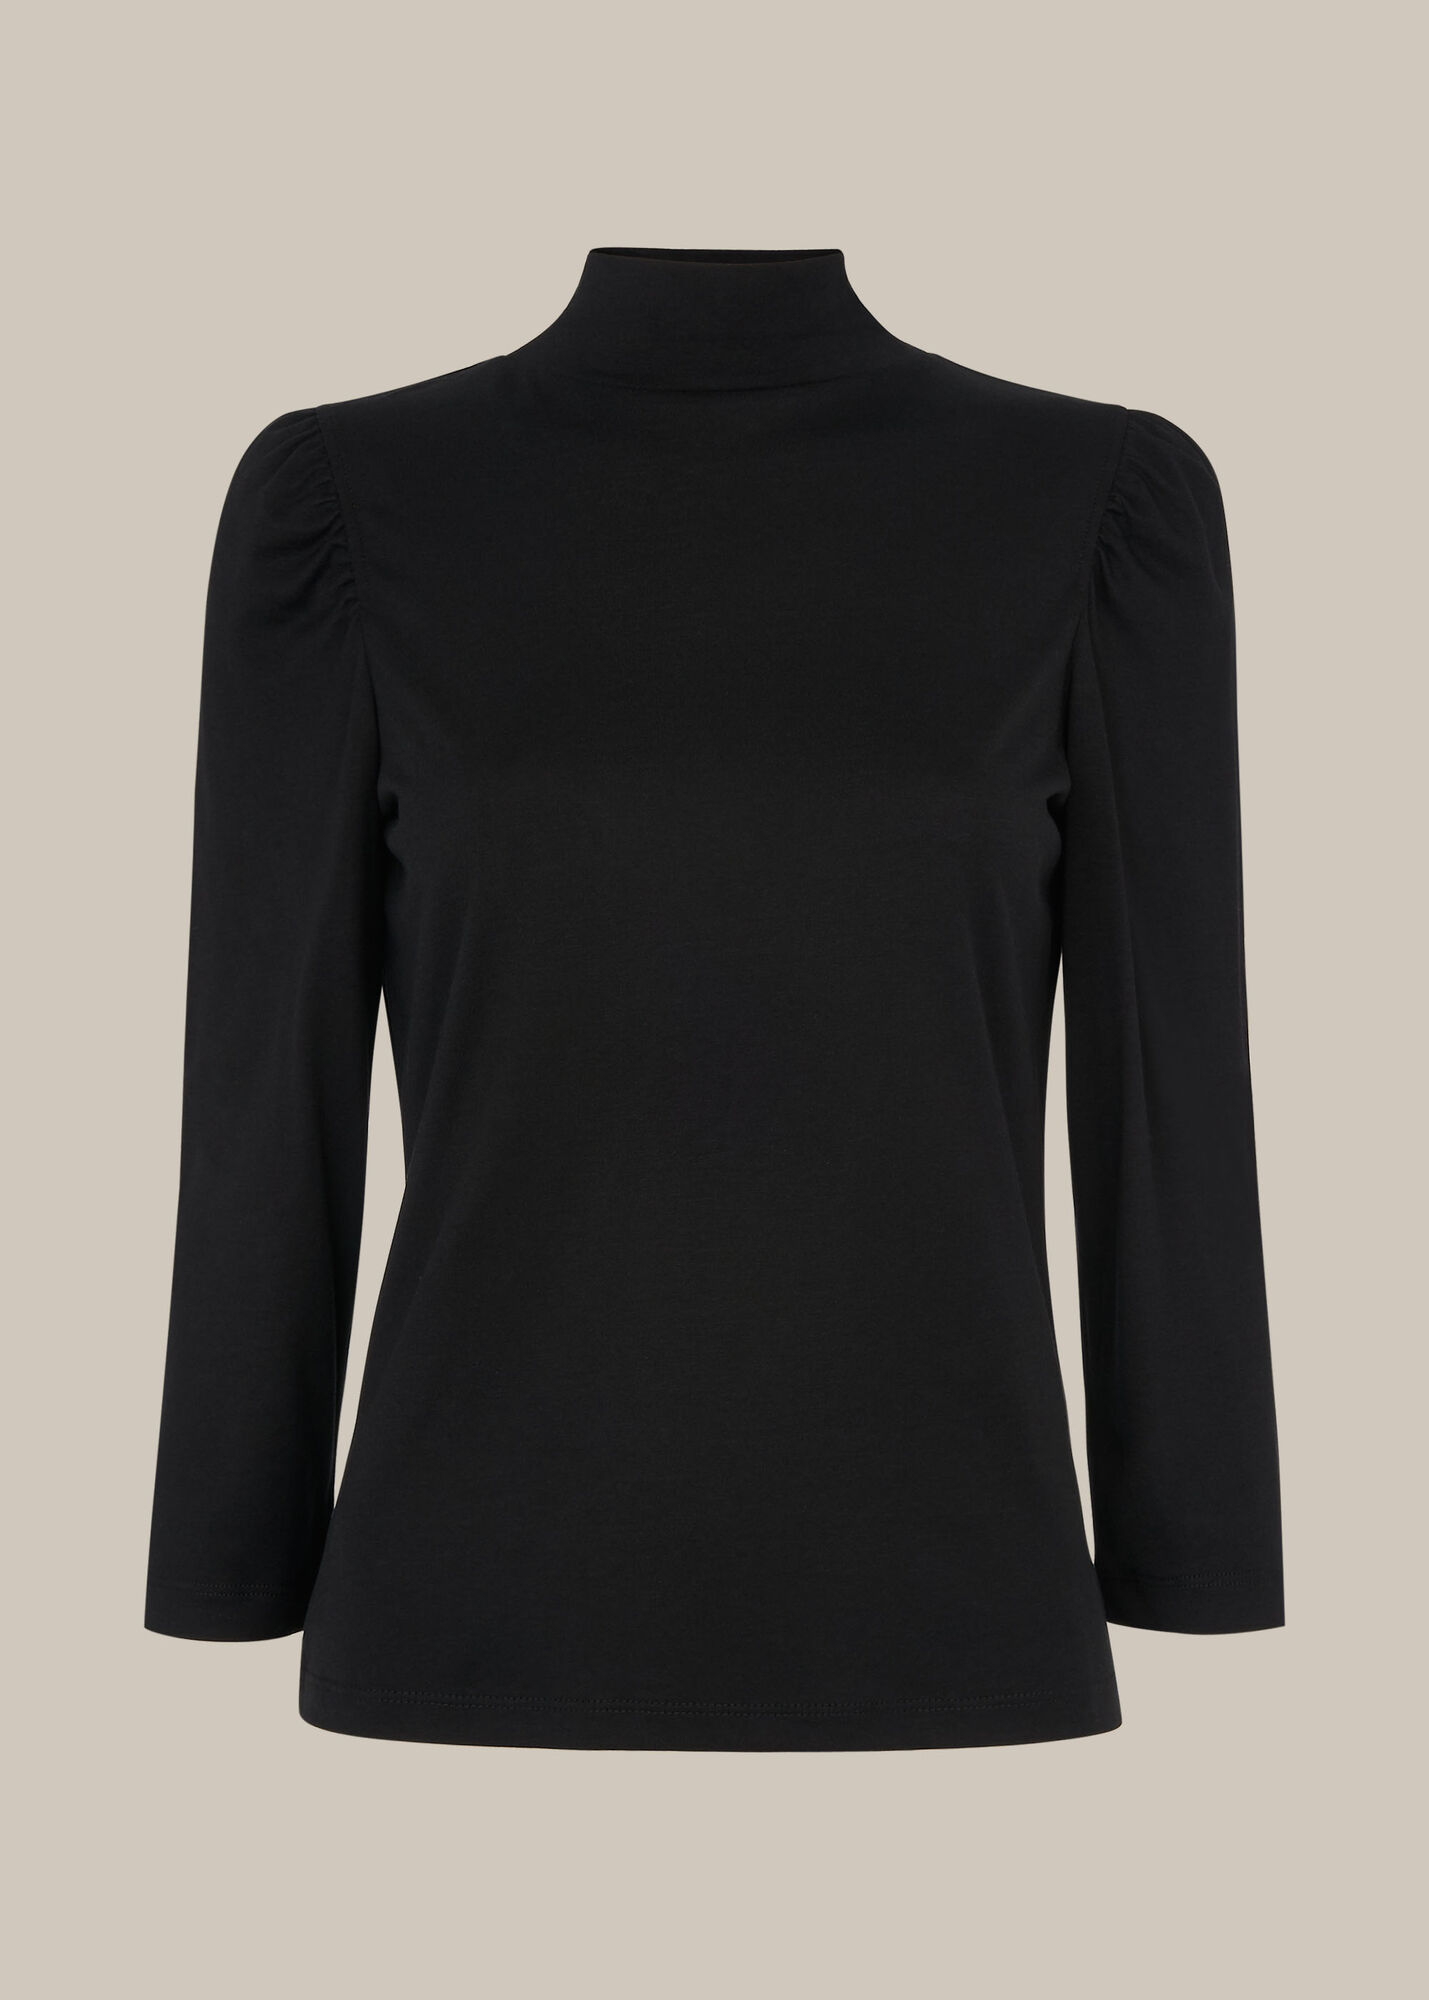 Black High Neck Puff Sleeve Top | WHISTLES